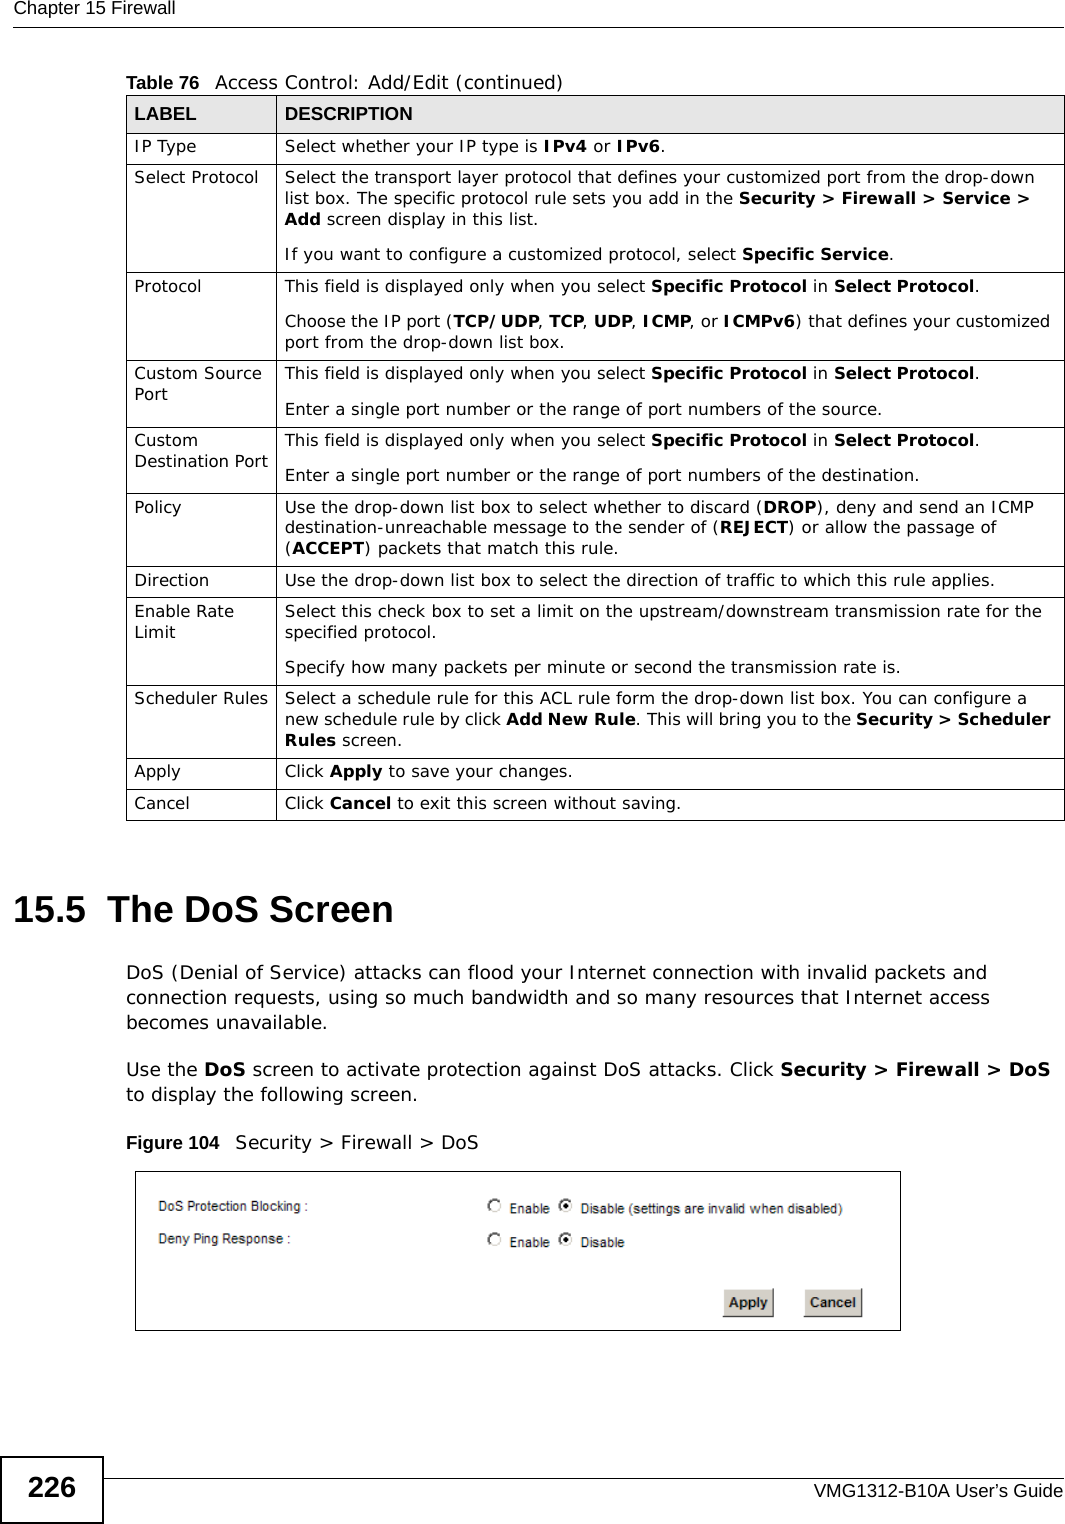 Chapter 15 FirewallVMG1312-B10A User’s Guide22615.5  The DoS ScreenDoS (Denial of Service) attacks can flood your Internet connection with invalid packets and connection requests, using so much bandwidth and so many resources that Internet access becomes unavailable. Use the DoS screen to activate protection against DoS attacks. Click Security &gt; Firewall &gt; DoS to display the following screen. Figure 104   Security &gt; Firewall &gt; DoSIP Type Select whether your IP type is IPv4 or IPv6. Select Protocol Select the transport layer protocol that defines your customized port from the drop-down list box. The specific protocol rule sets you add in the Security &gt; Firewall &gt; Service &gt; Add screen display in this list. If you want to configure a customized protocol, select Specific Service.Protocol This field is displayed only when you select Specific Protocol in Select Protocol.Choose the IP port (TCP/UDP, TCP, UDP, ICMP, or ICMPv6) that defines your customized port from the drop-down list box.Custom Source Port This field is displayed only when you select Specific Protocol in Select Protocol.Enter a single port number or the range of port numbers of the source.Custom Destination Port This field is displayed only when you select Specific Protocol in Select Protocol.Enter a single port number or the range of port numbers of the destination.Policy Use the drop-down list box to select whether to discard (DROP), deny and send an ICMP destination-unreachable message to the sender of (REJECT) or allow the passage of (ACCEPT) packets that match this rule.Direction  Use the drop-down list box to select the direction of traffic to which this rule applies.Enable Rate Limit Select this check box to set a limit on the upstream/downstream transmission rate for the specified protocol.Specify how many packets per minute or second the transmission rate is.Scheduler Rules Select a schedule rule for this ACL rule form the drop-down list box. You can configure a new schedule rule by click Add New Rule. This will bring you to the Security &gt; Scheduler Rules screen.Apply Click Apply to save your changes.Cancel Click Cancel to exit this screen without saving.Table 76   Access Control: Add/Edit (continued)LABEL DESCRIPTION